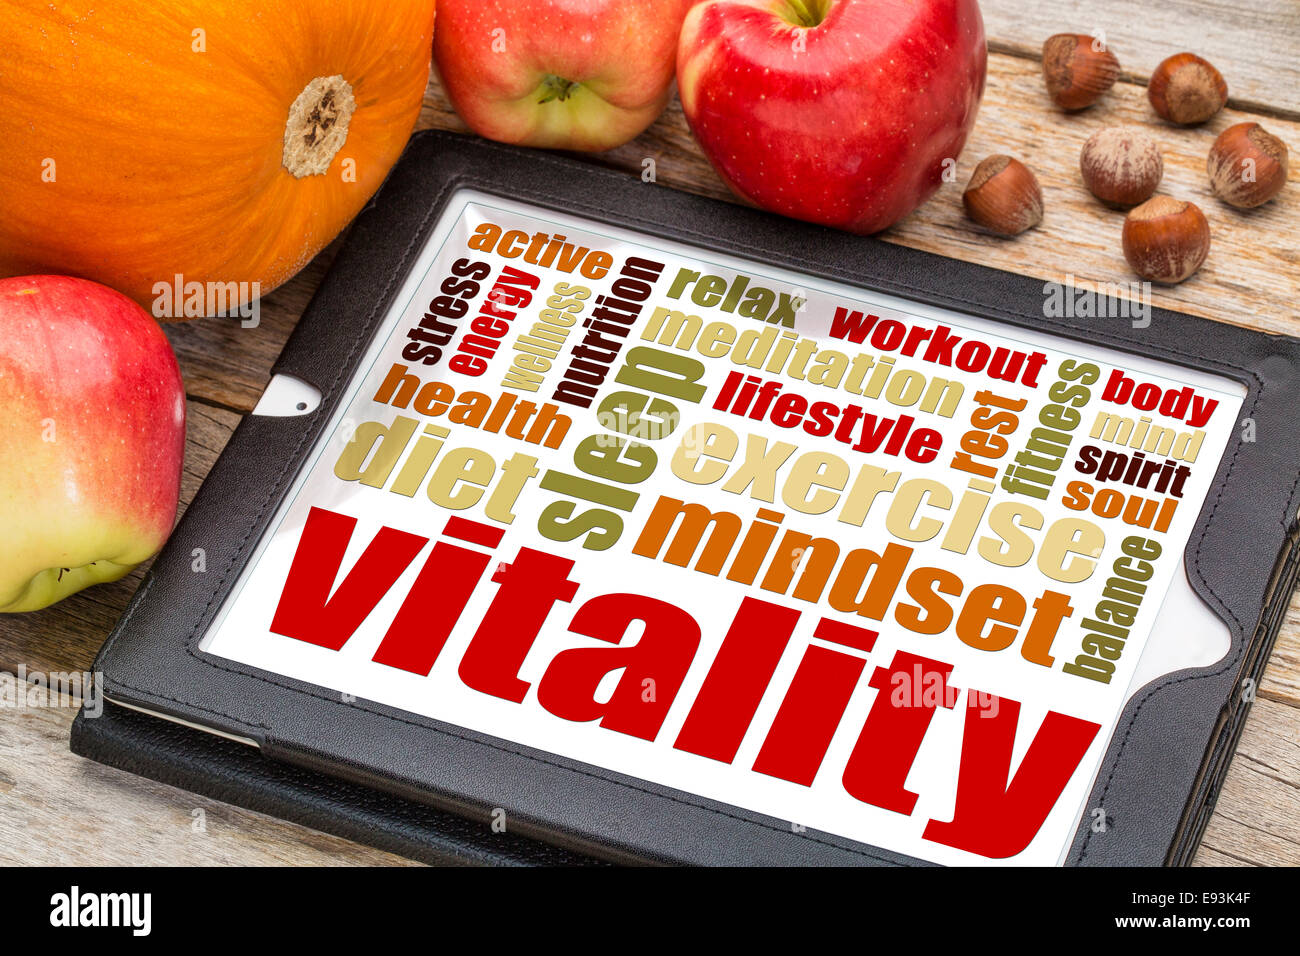 vitality or vital energy word cloud on a  digital tablet with apples, pumpkin and hazelnuts Stock Photo